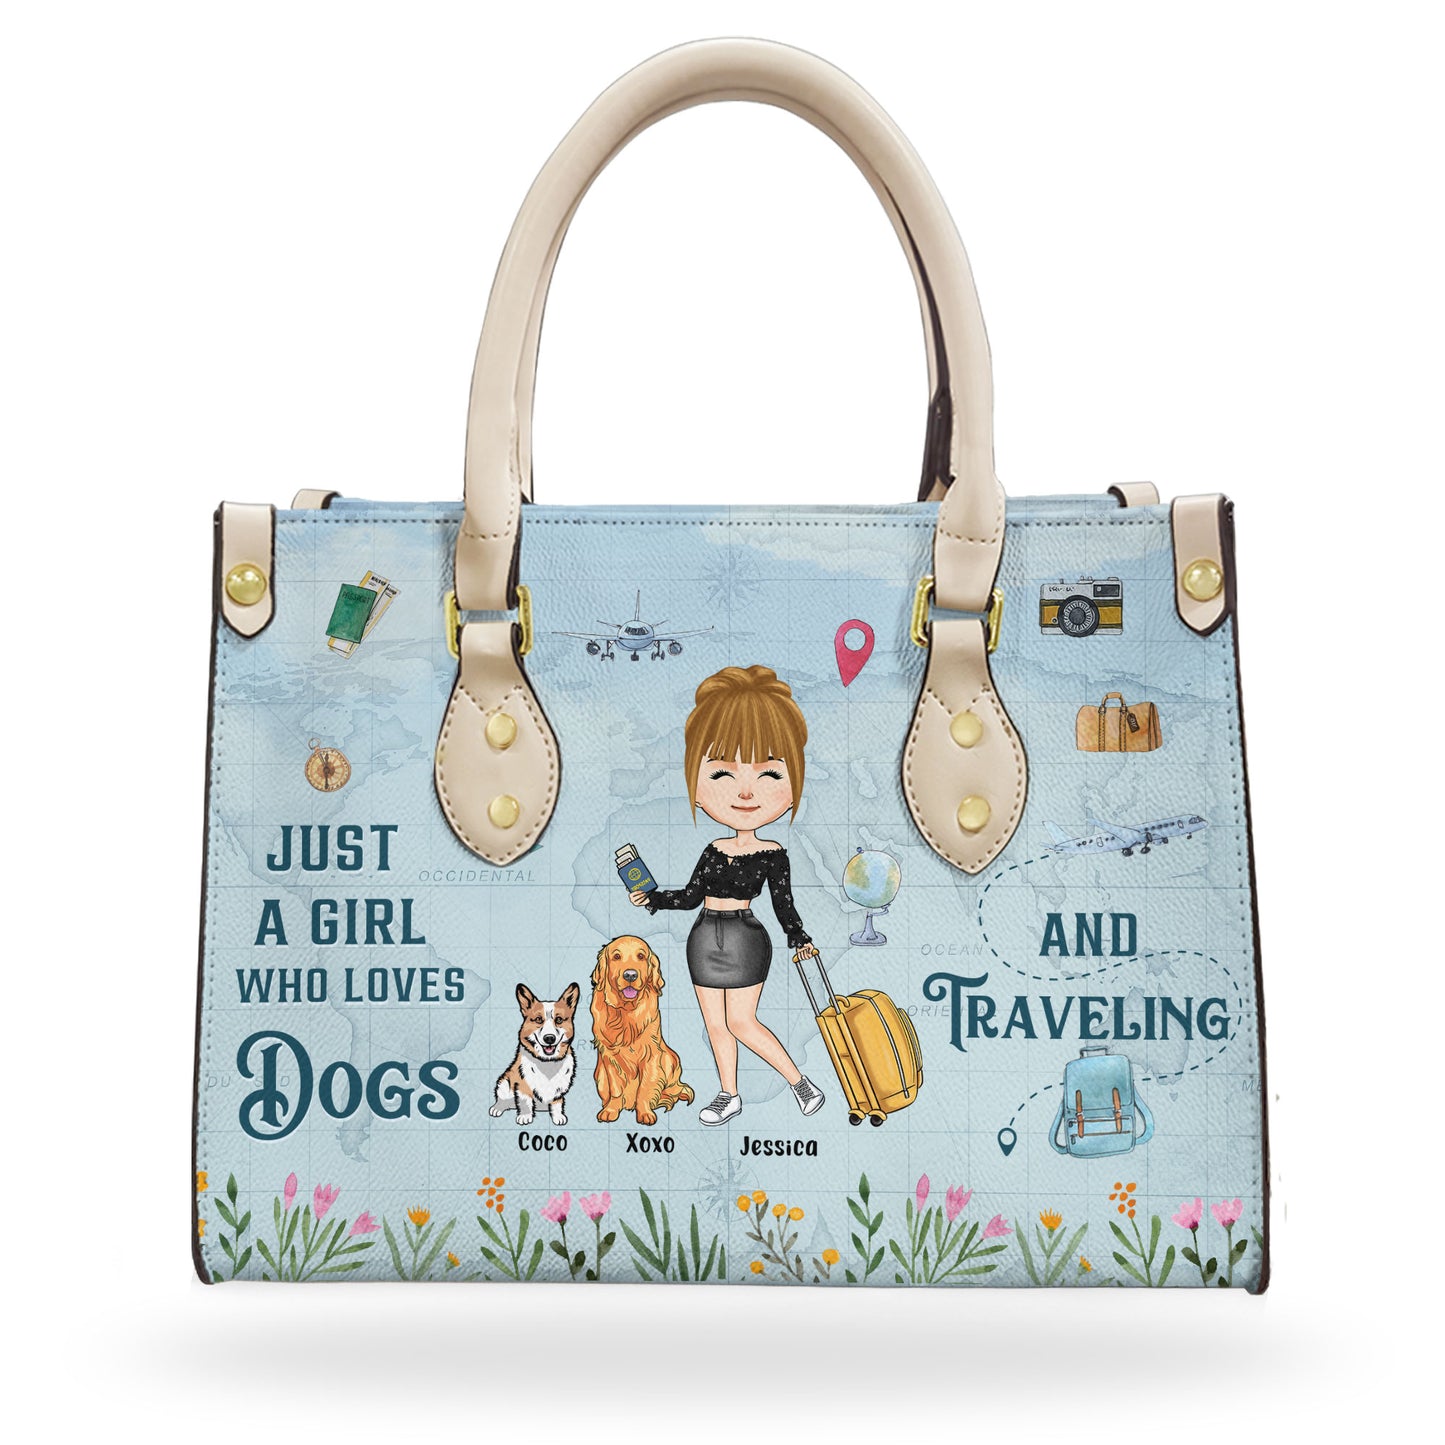 Just A Girl Who Loves Dogs And Traveling - Personalized Leather Bag